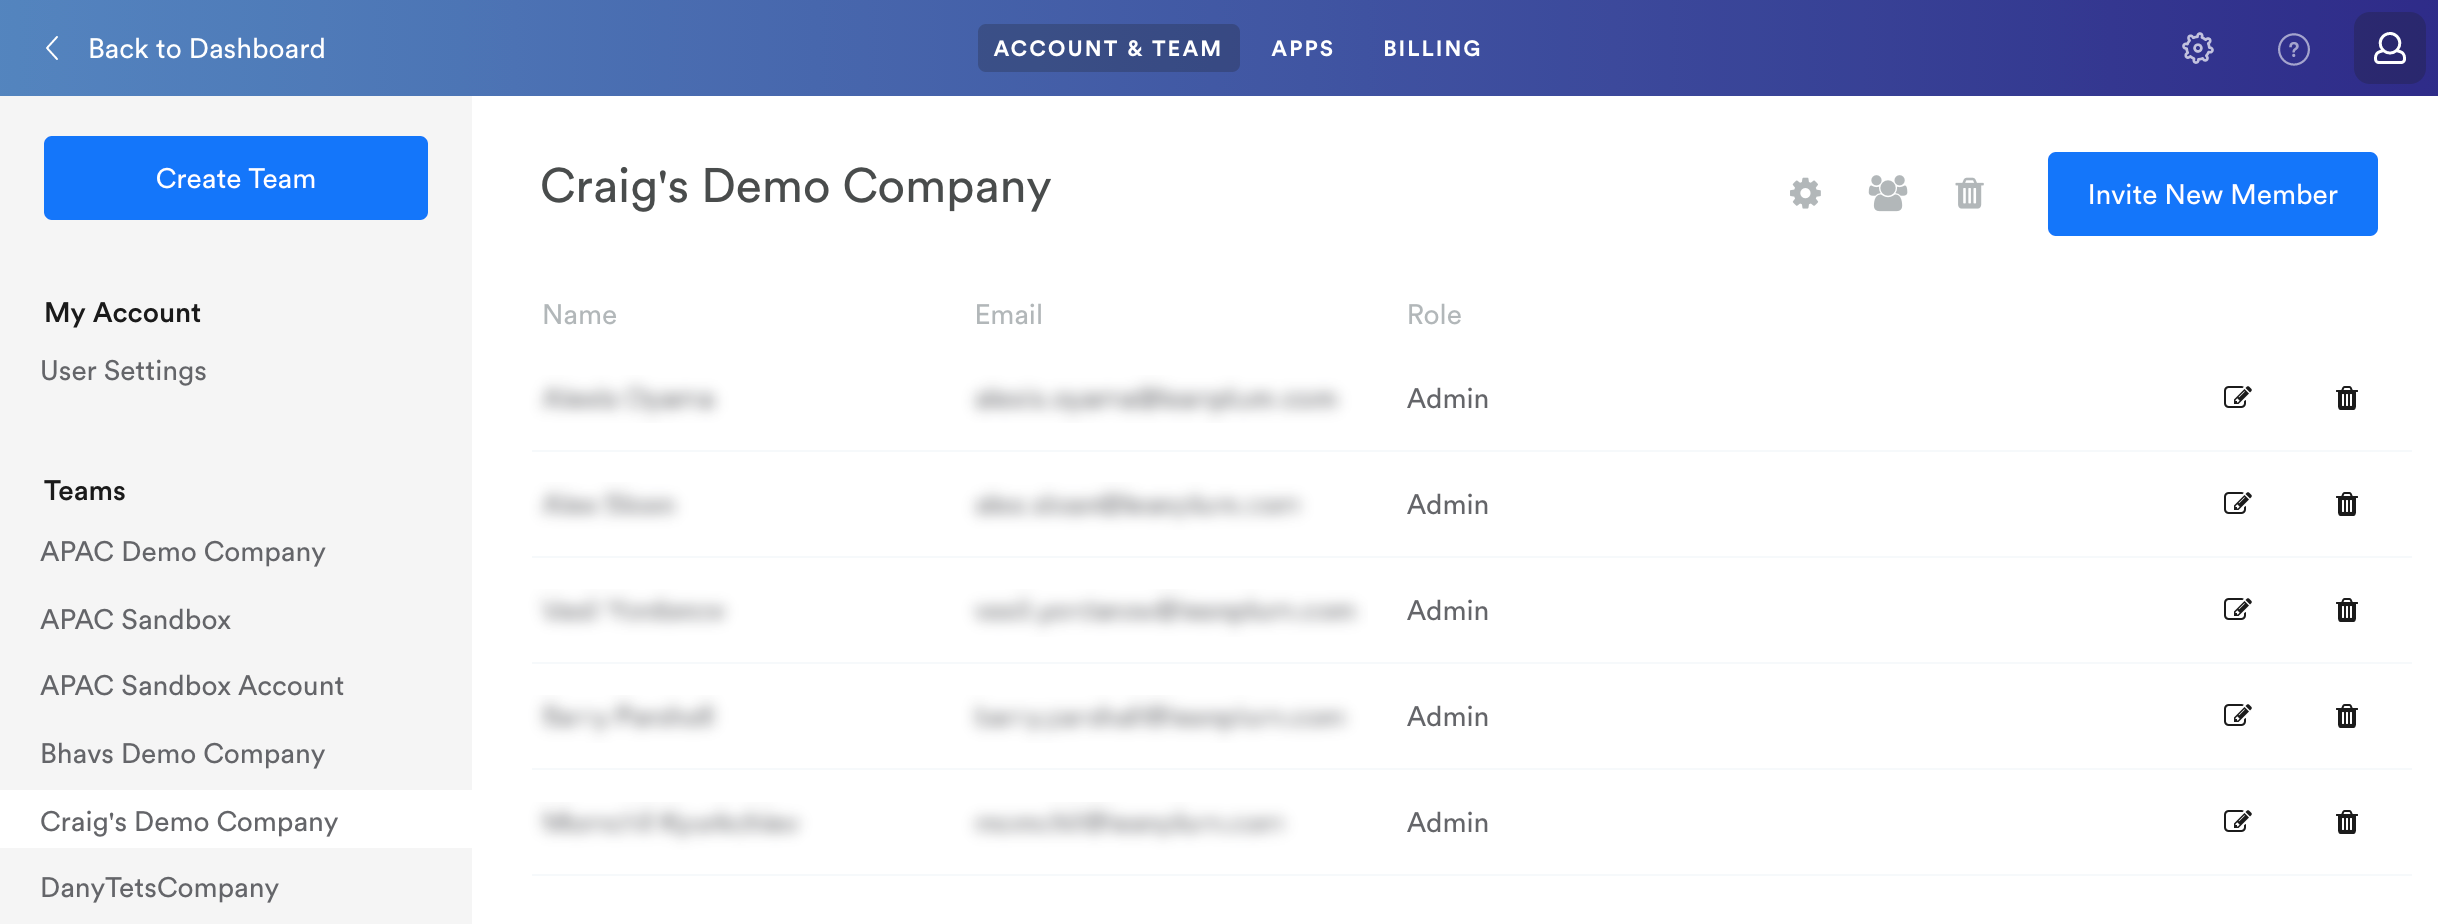 Admins have full access to all areas of Leanplum.